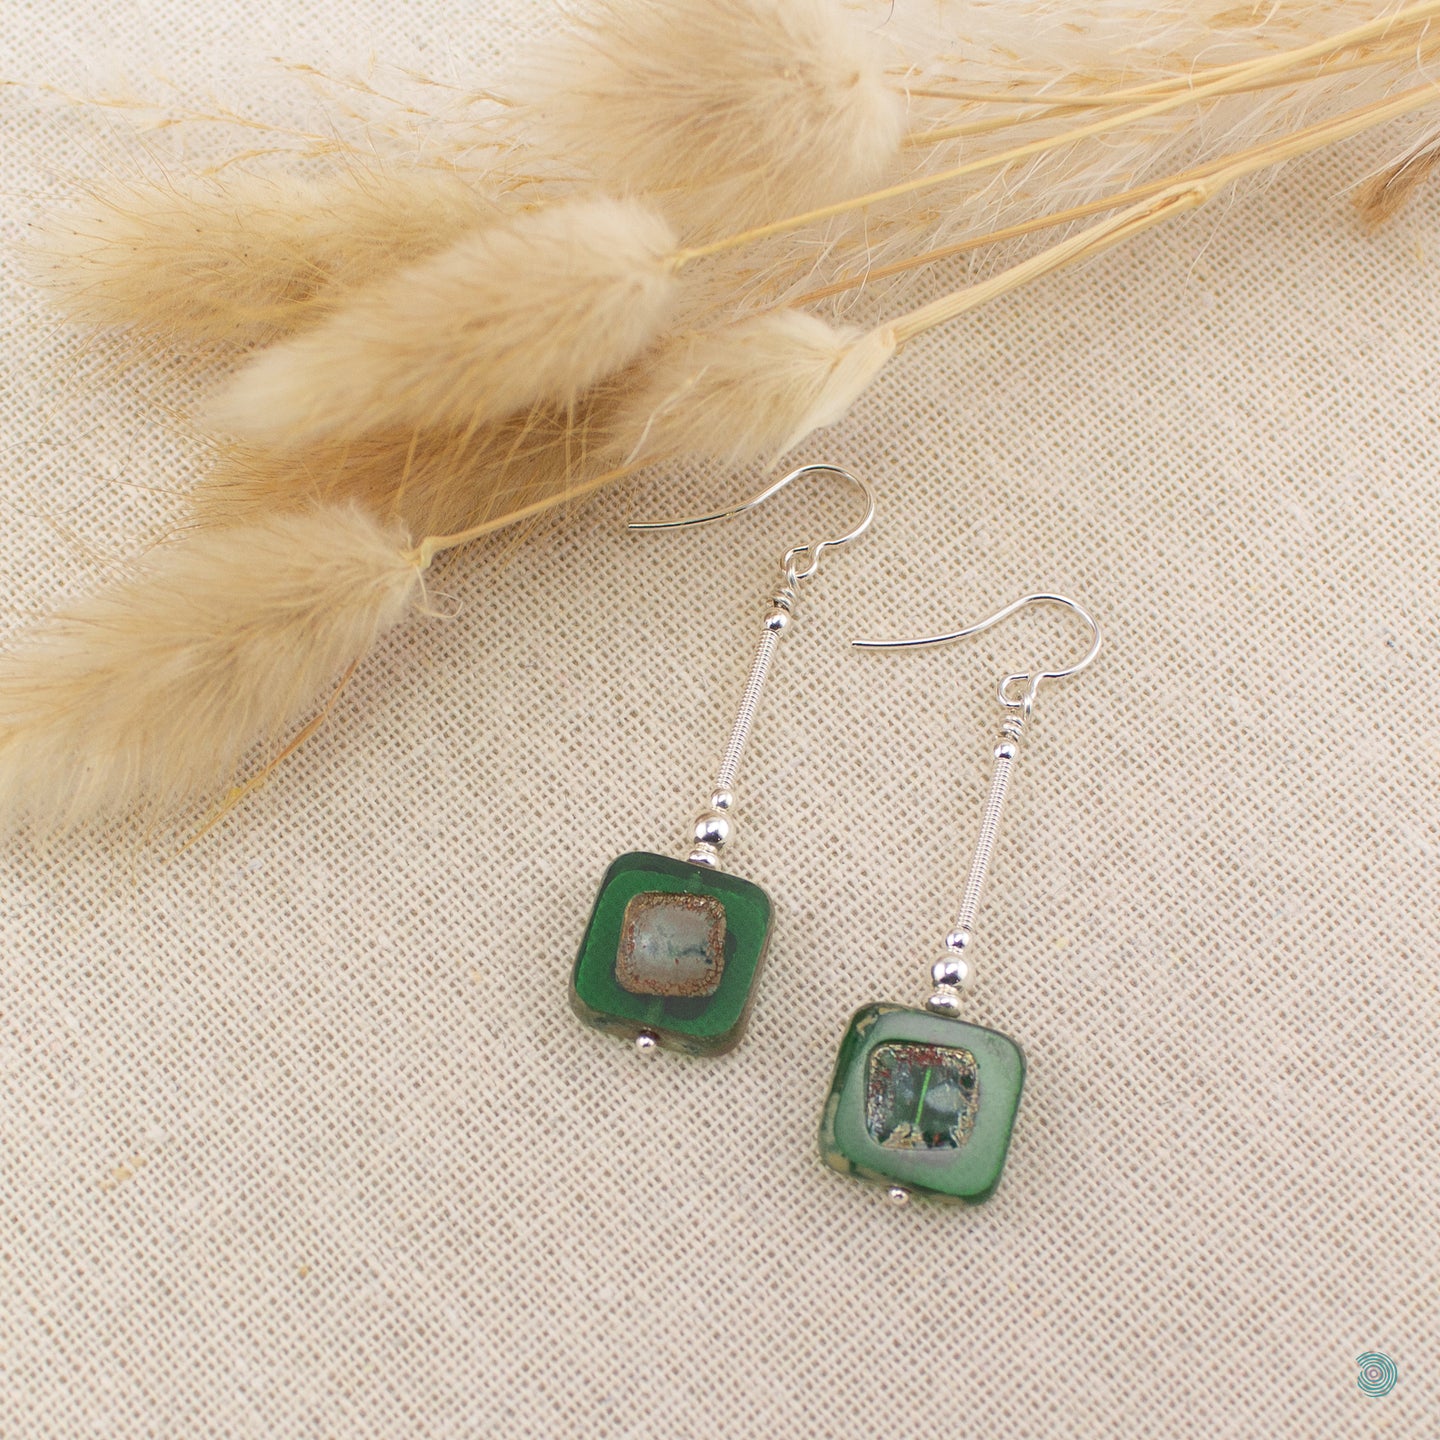 Hand wrapped silver filled drop earrings with pretty dark green Czech glass squares. These earrings sit on sterling silver ear wires and come with backs included. They are approximately 4cm in drop length from the base of the ear wires and are presented in a pretty gift pouch for safe keeping. Designed and handmade in Dingle